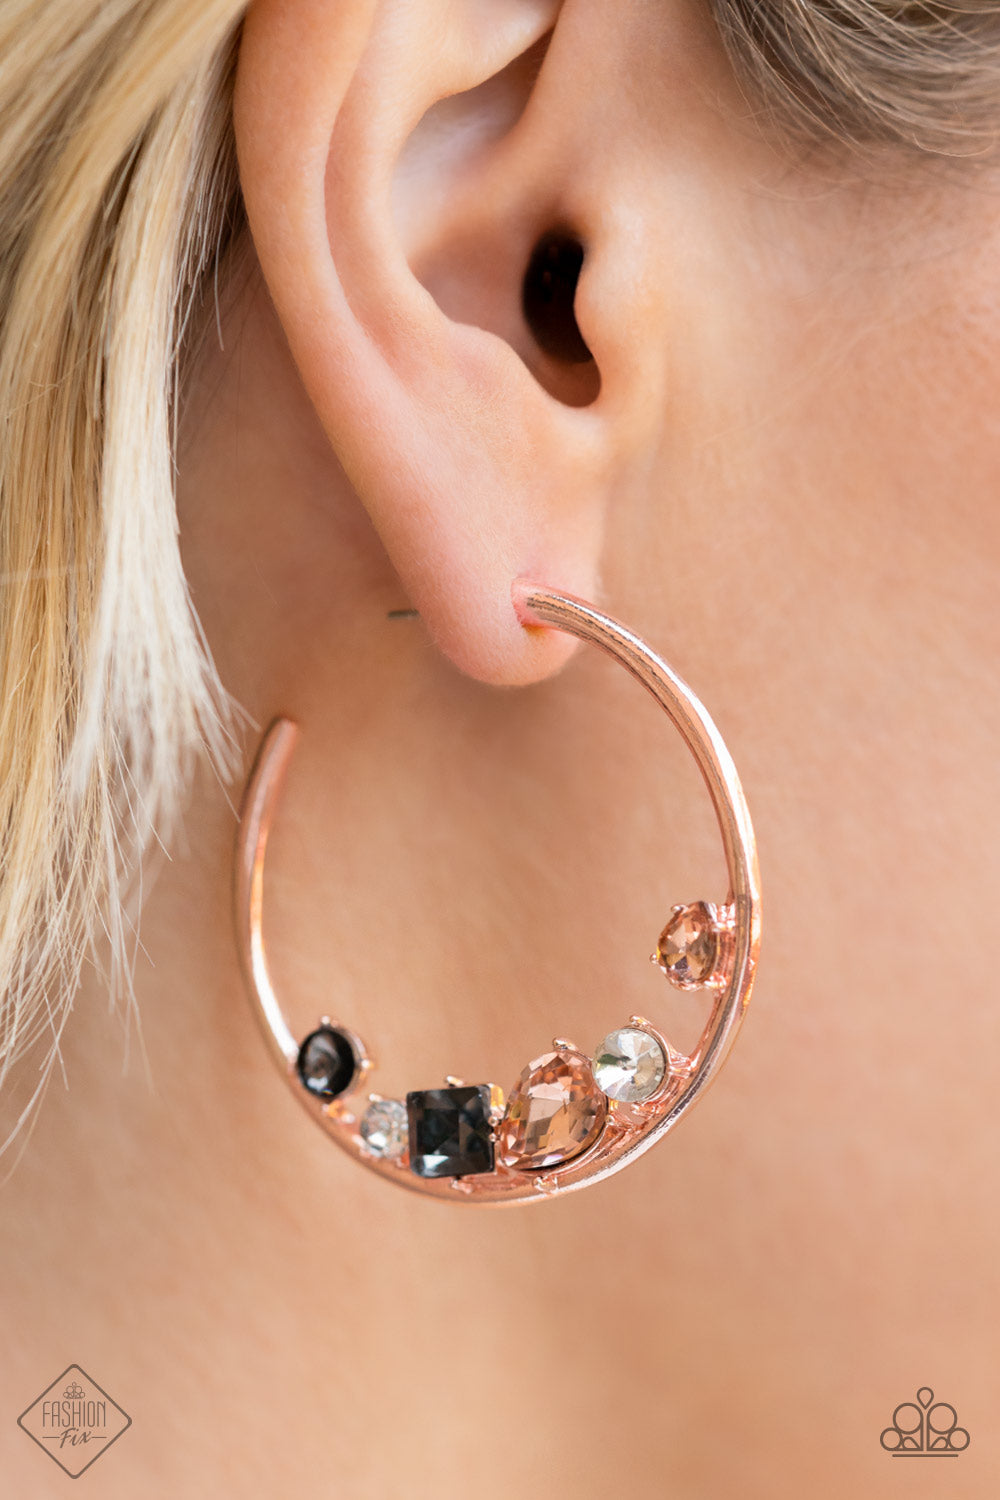 Attractive Allure - Rose Gold Earrings - Fashion Fix